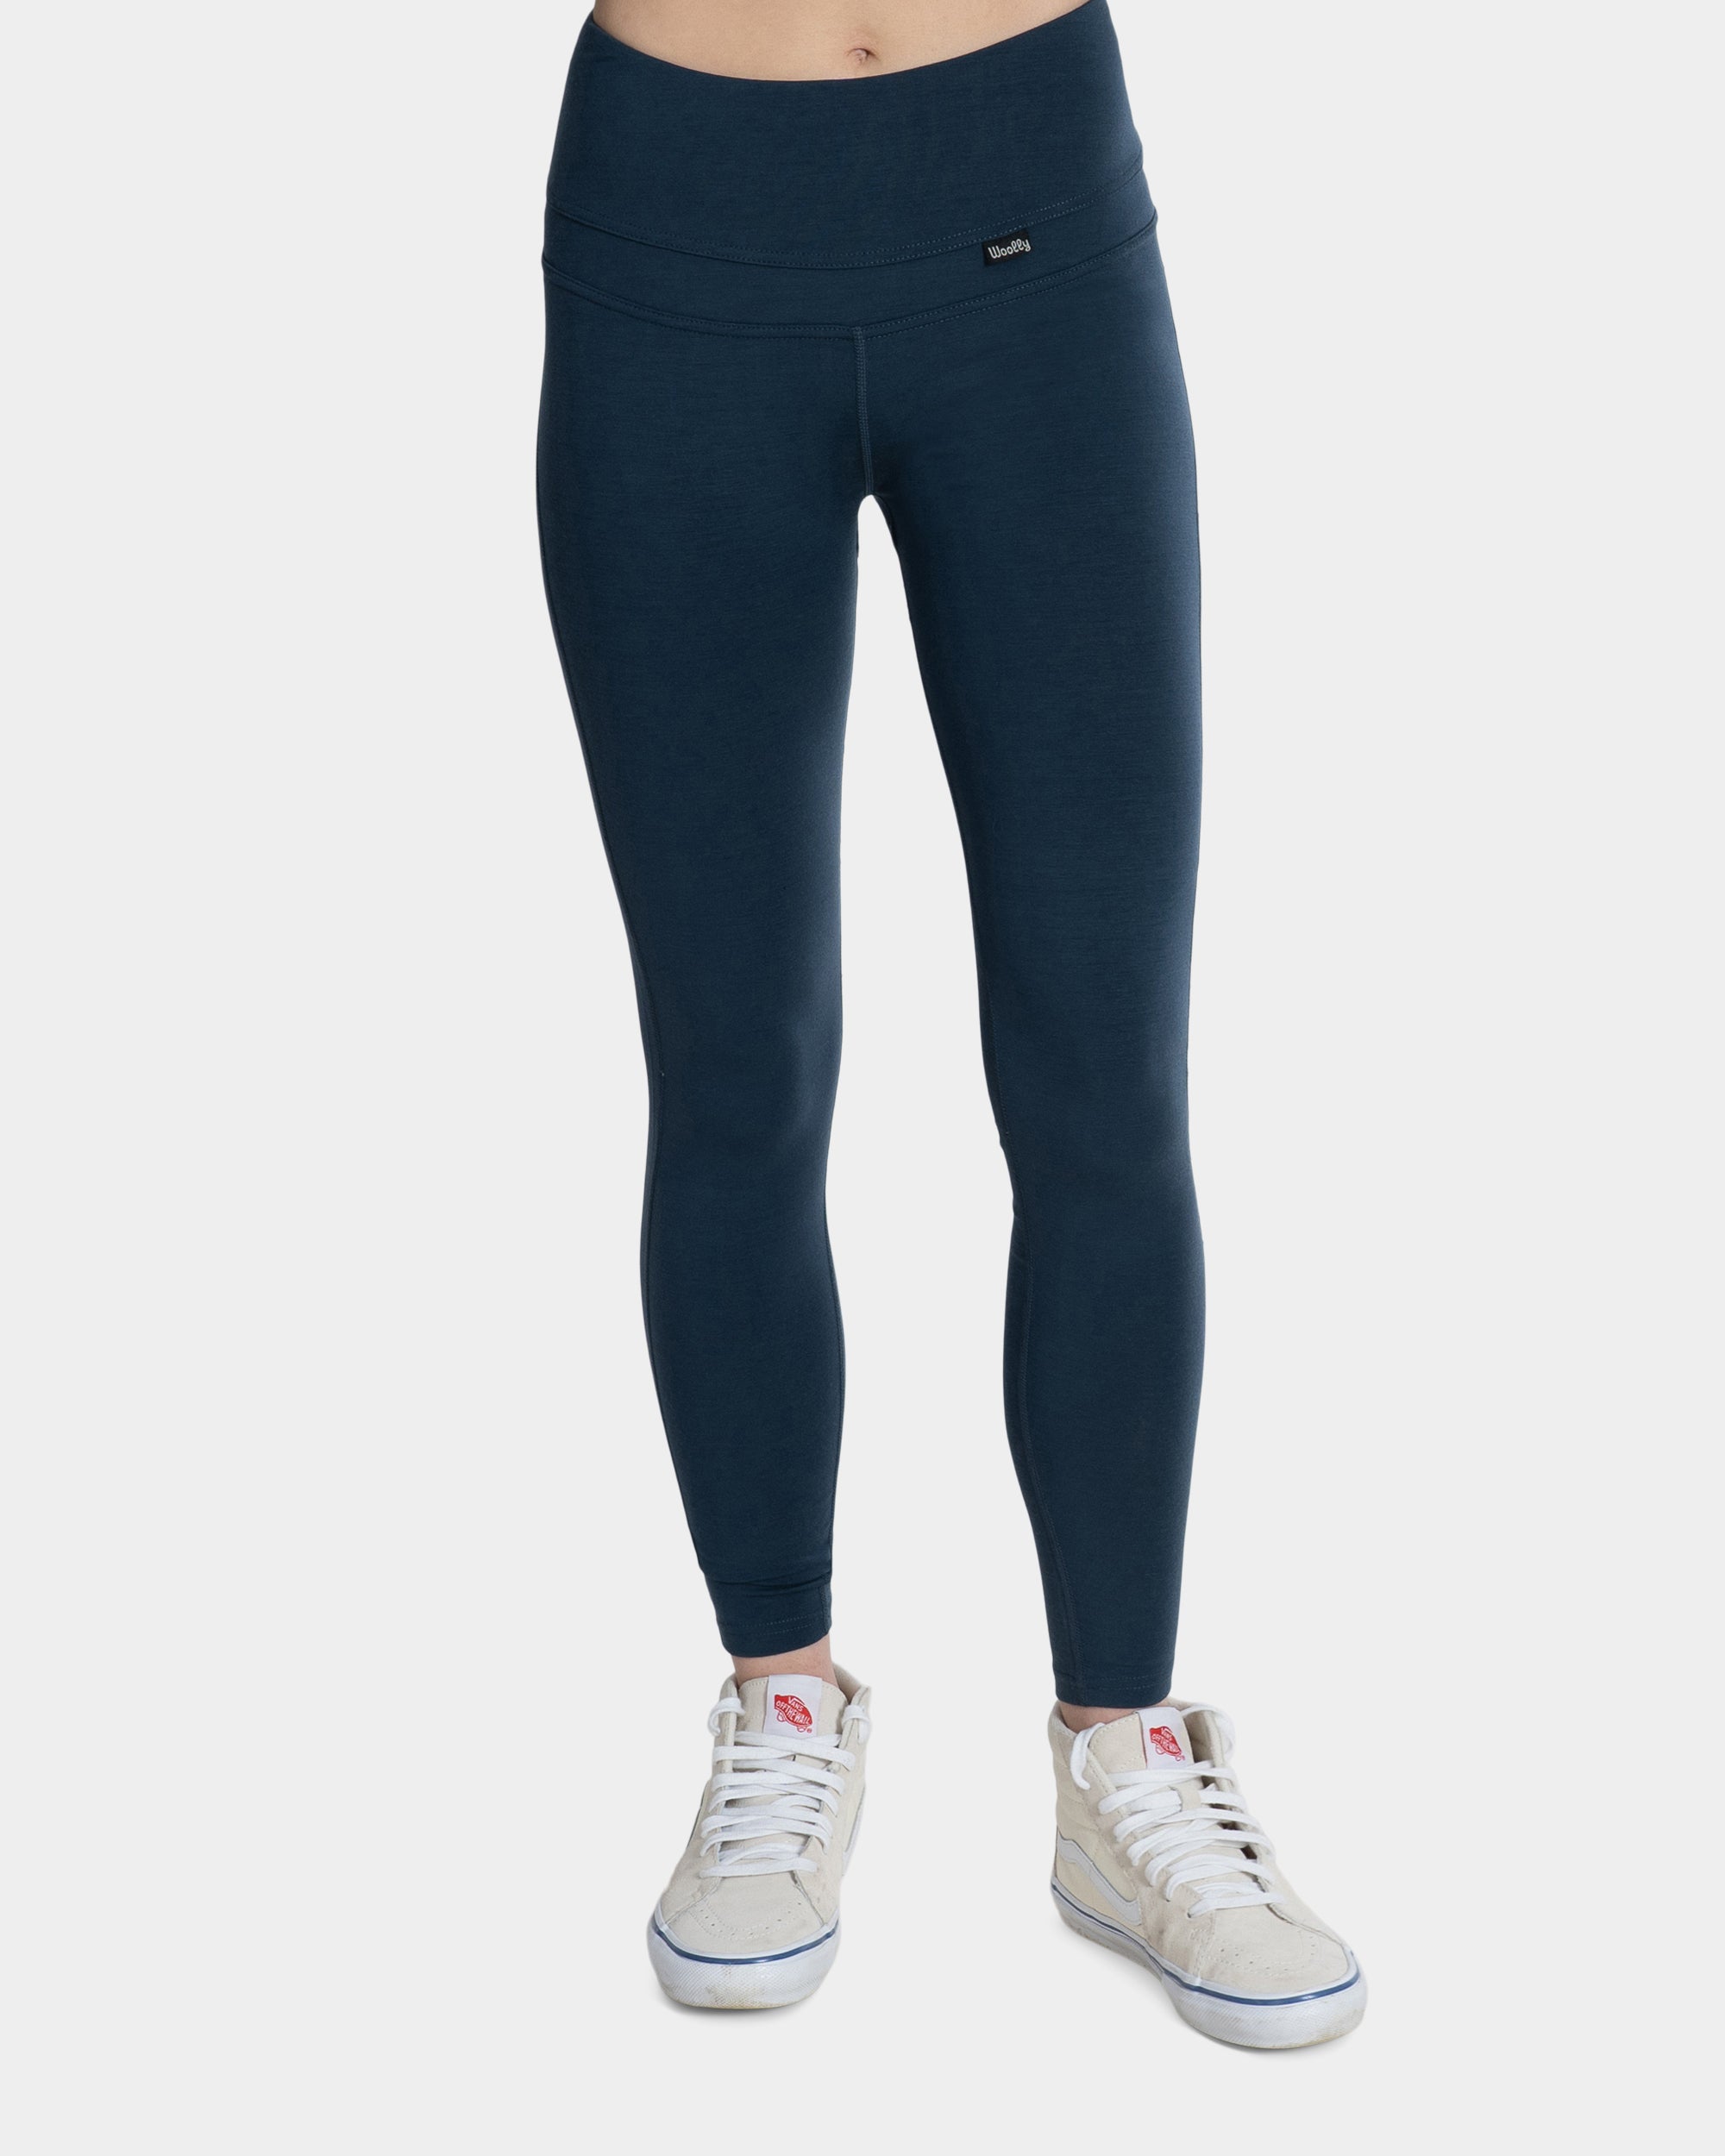 Woolly Clothing Women's Merino Wool Legging - Wicking Breathable Anti-Odor,  Peat, X-Small : : Clothing, Shoes & Accessories